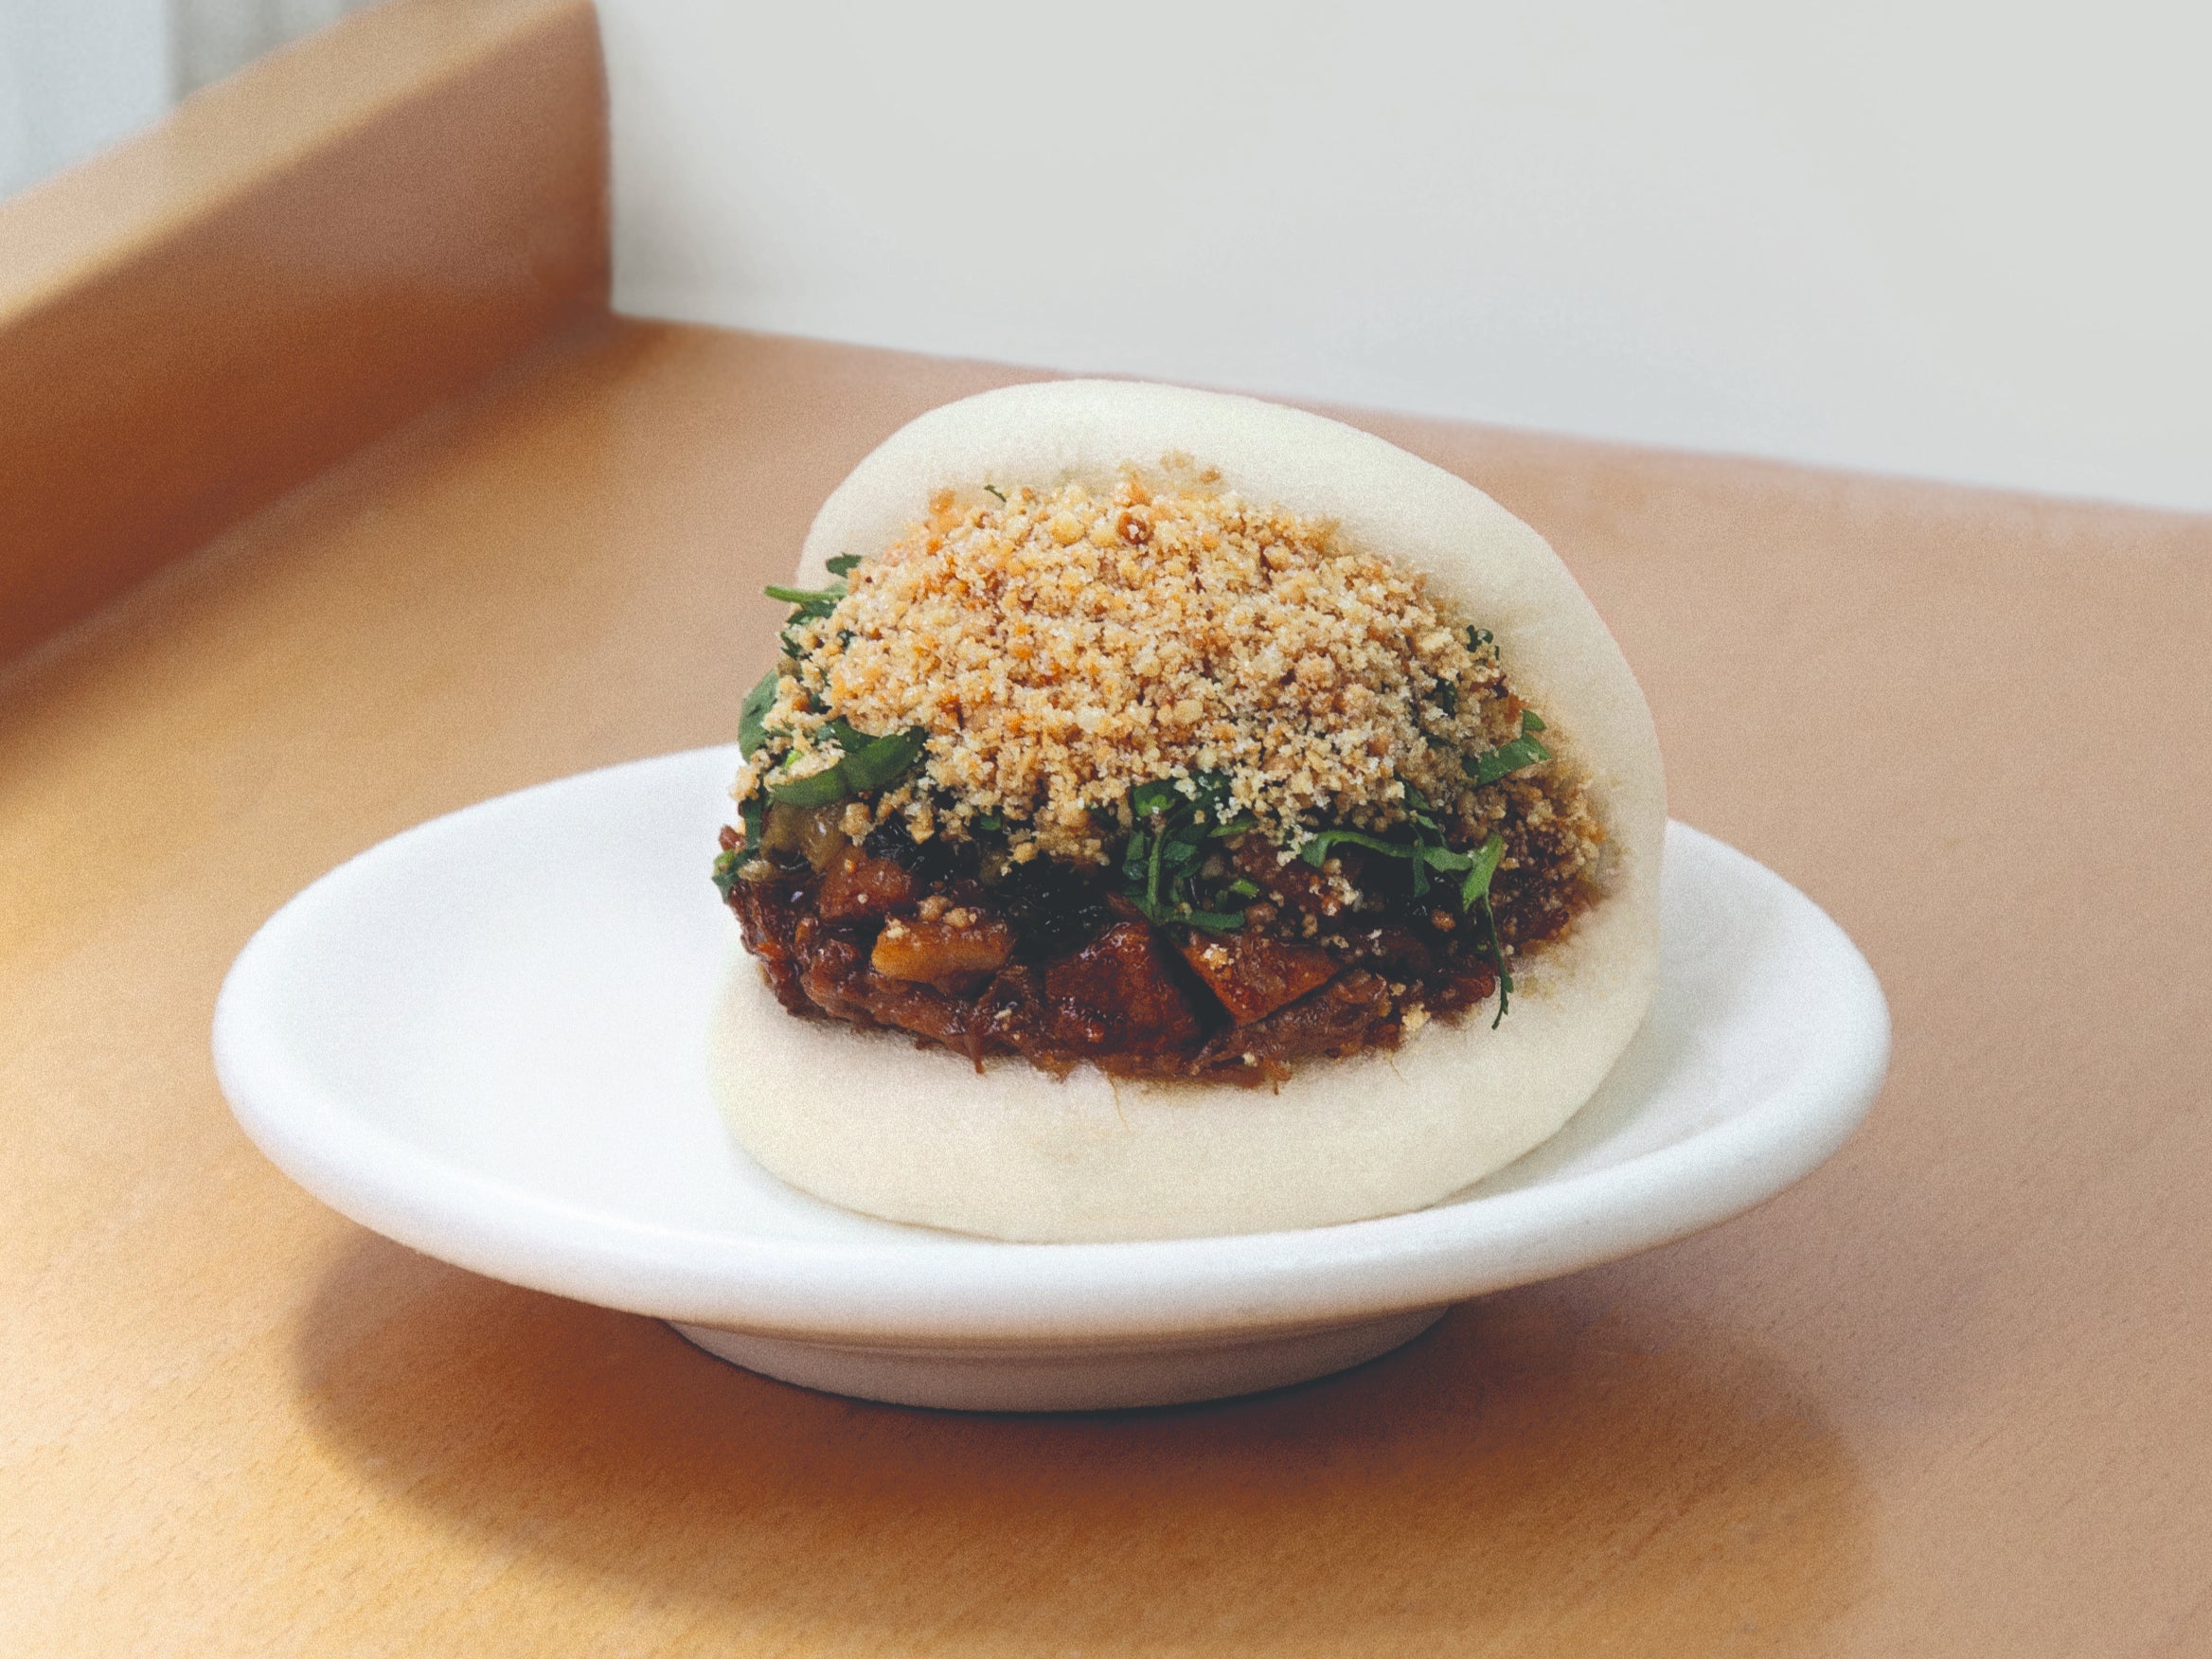 Bun in a million: compared to the larger buns in Taiwan, this bao is the ideal three-four bites